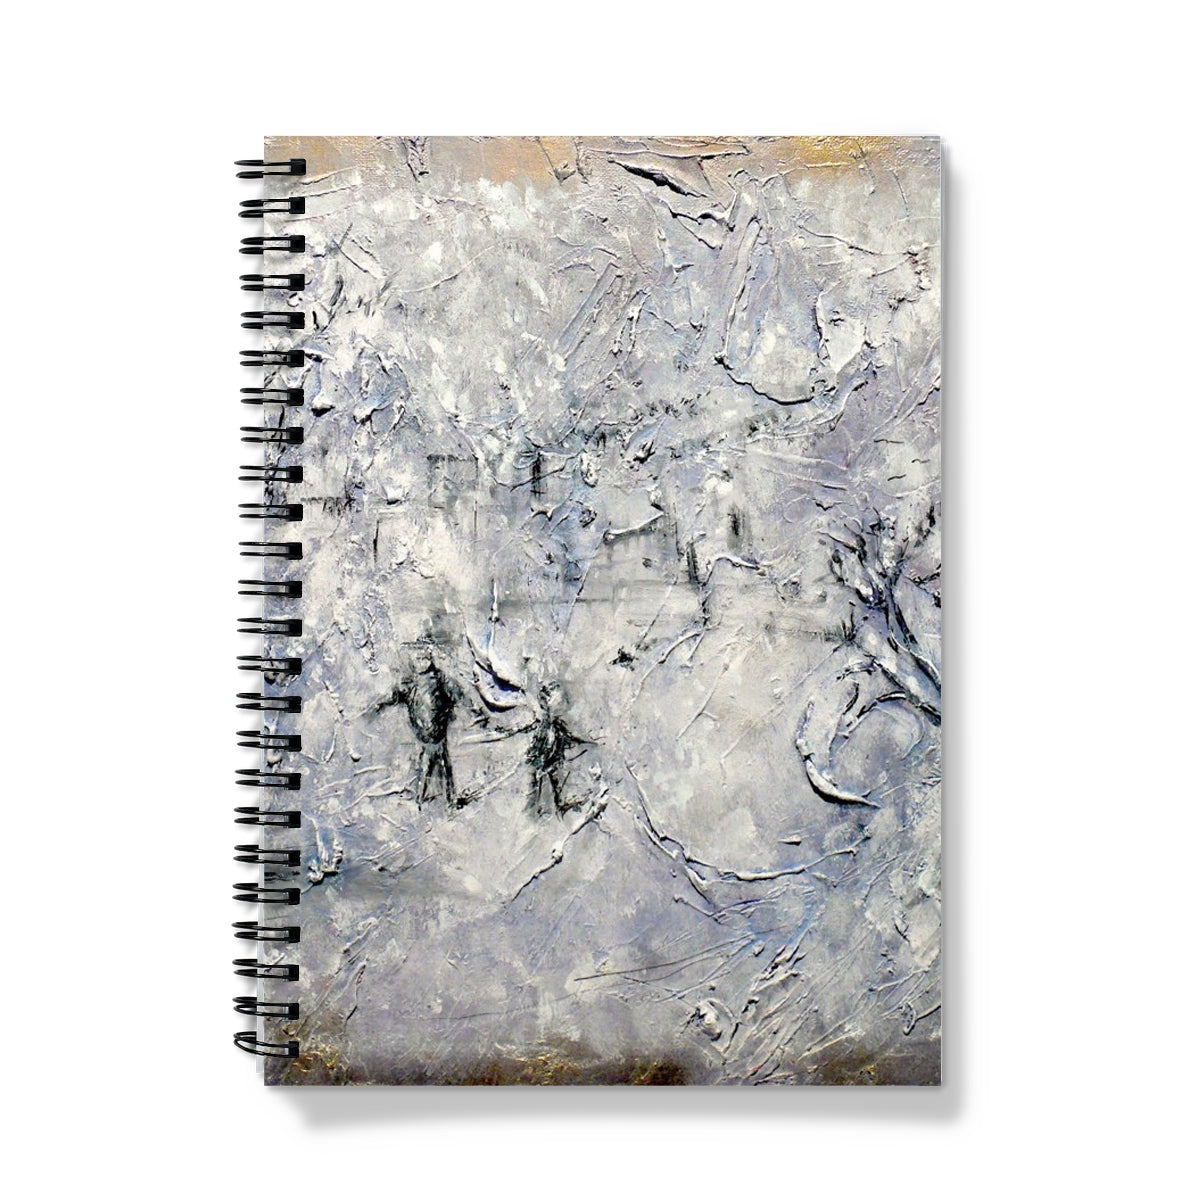 Father Daughter Snow Art Gifts Notebook-Journals & Notebooks-Abstract & Impressionistic Art Gallery-A4-Lined-Paintings, Prints, Homeware, Art Gifts From Scotland By Scottish Artist Kevin Hunter